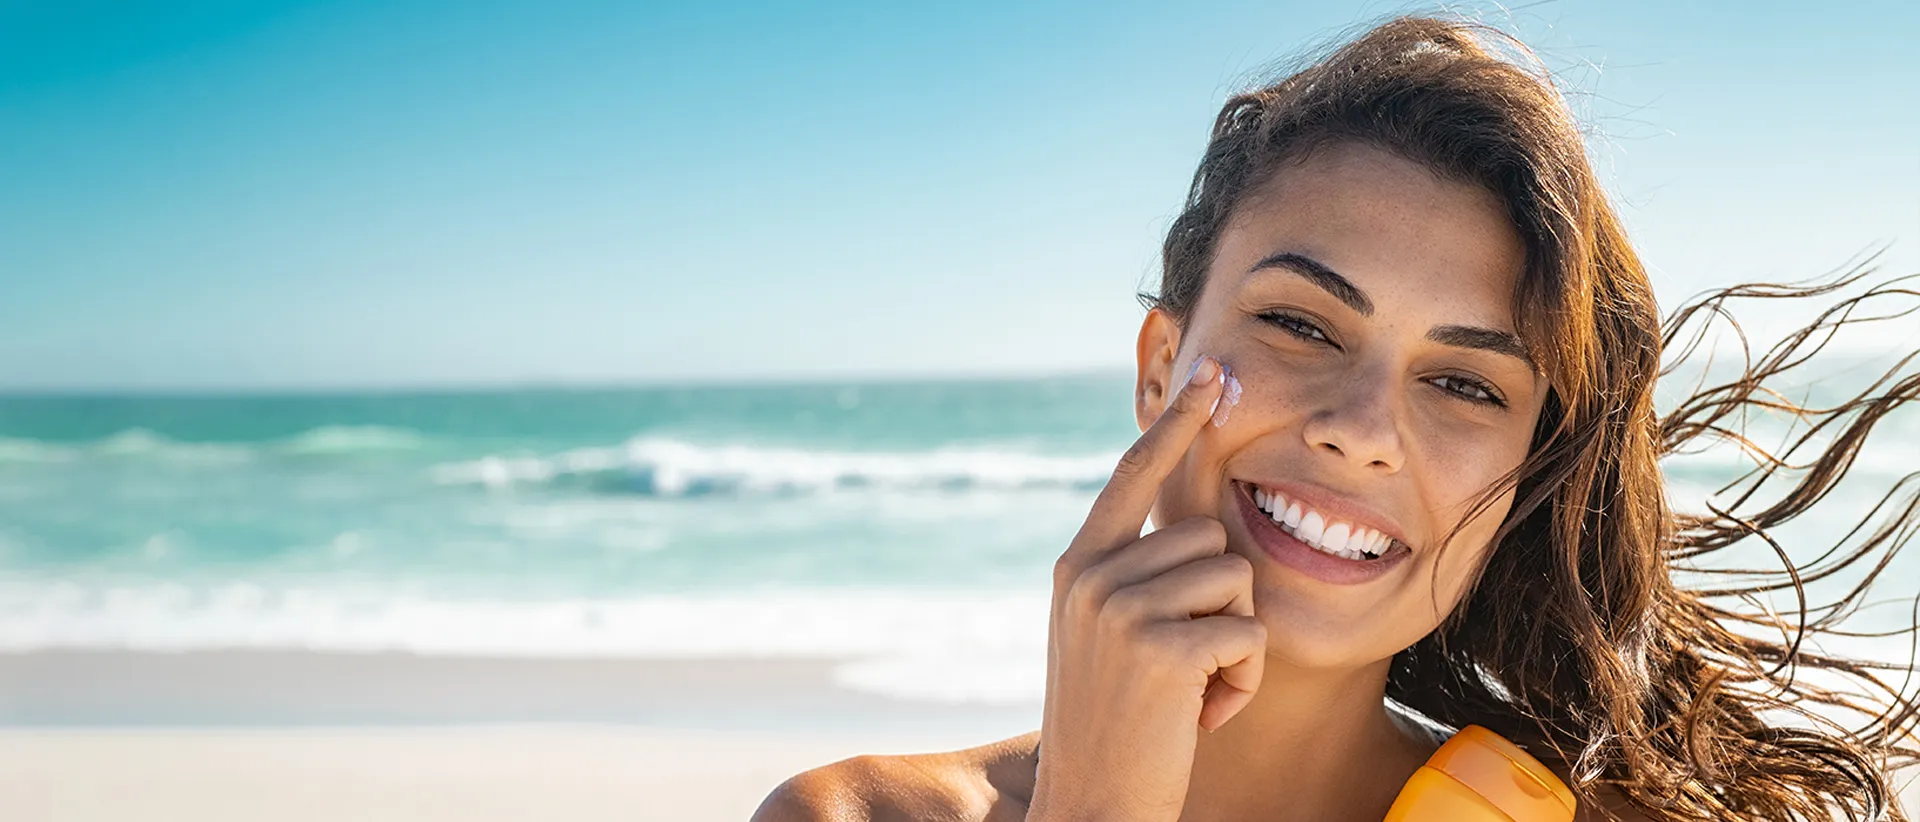 Woman on a beach applying sunscreen on her face - summer skin care routine for oily skin.